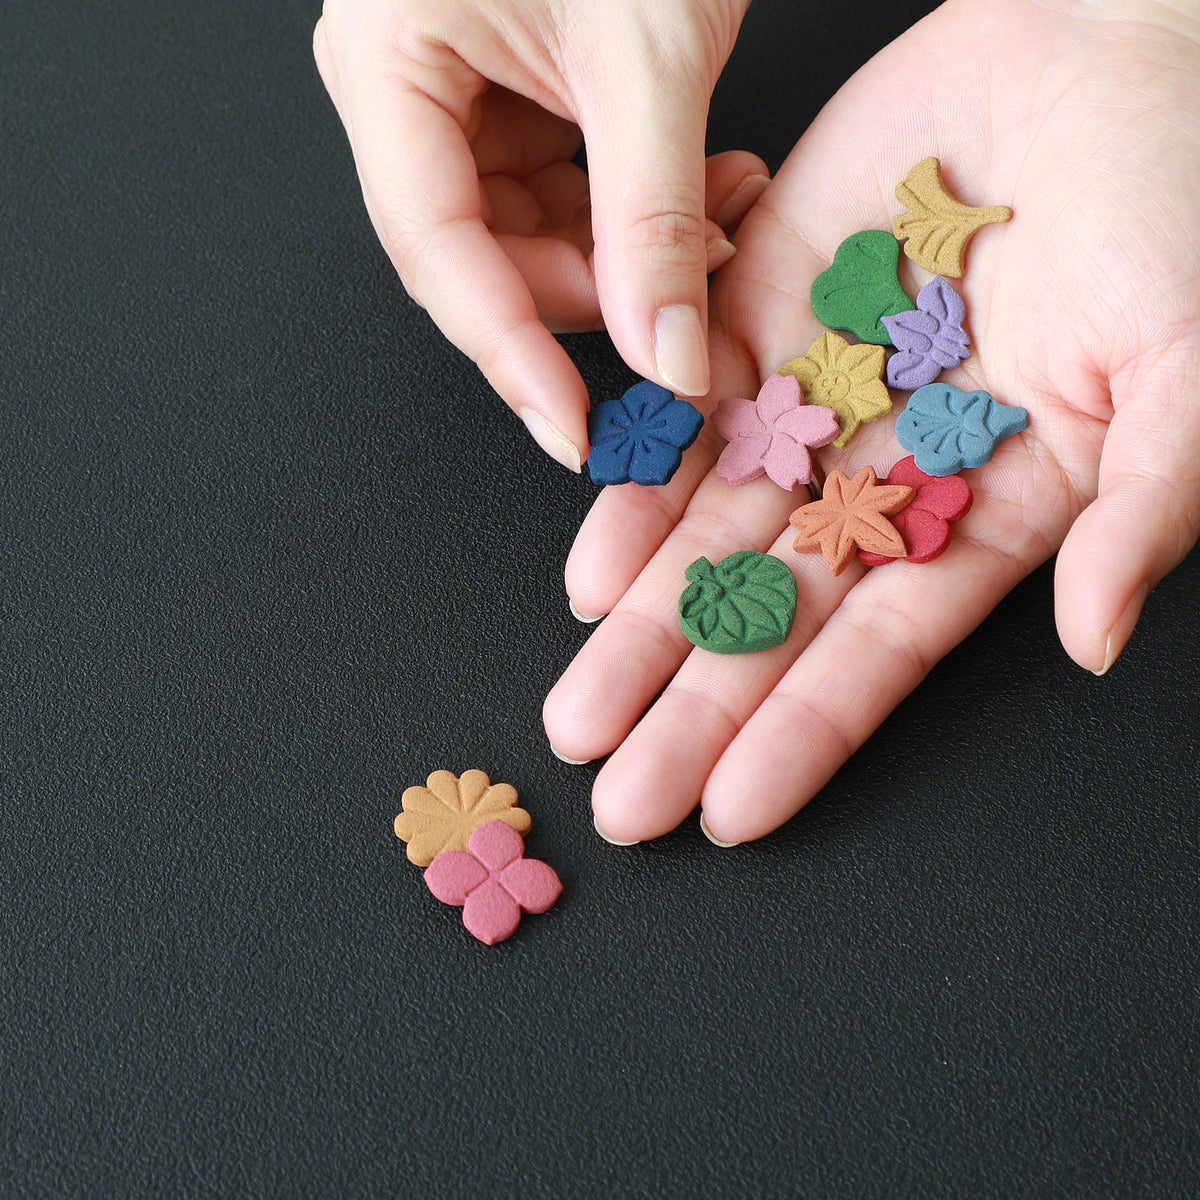 Colourful 12 pieces of pressed incense by Asayu Japan spread out on the hand of a person